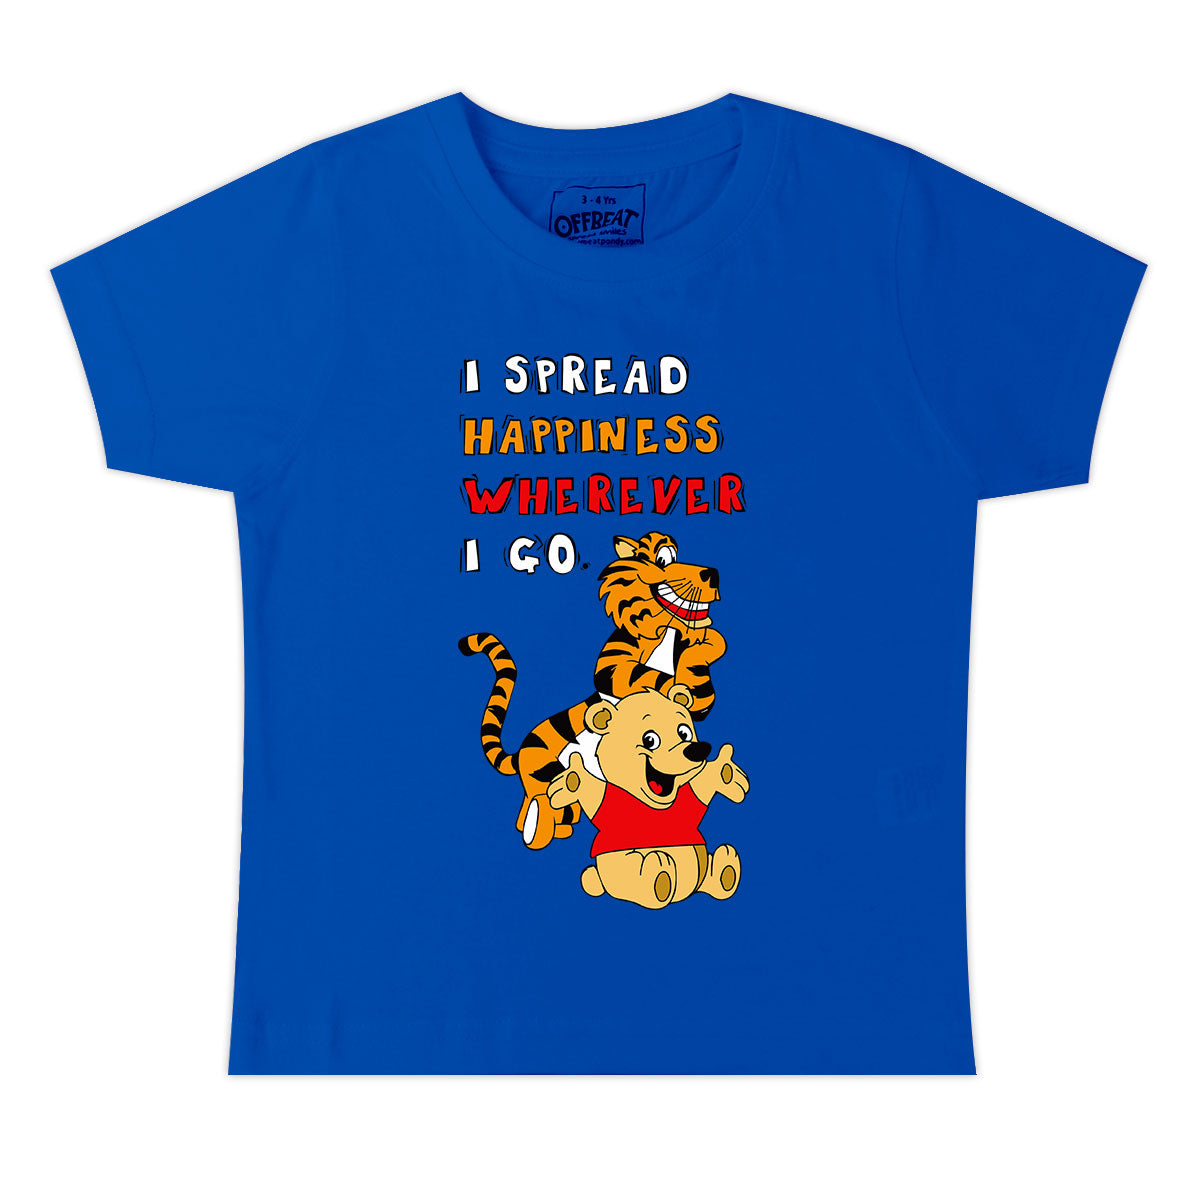 I Spread Happiness - Premium Round Neck Cotton Tees for Kids - Electric Blue